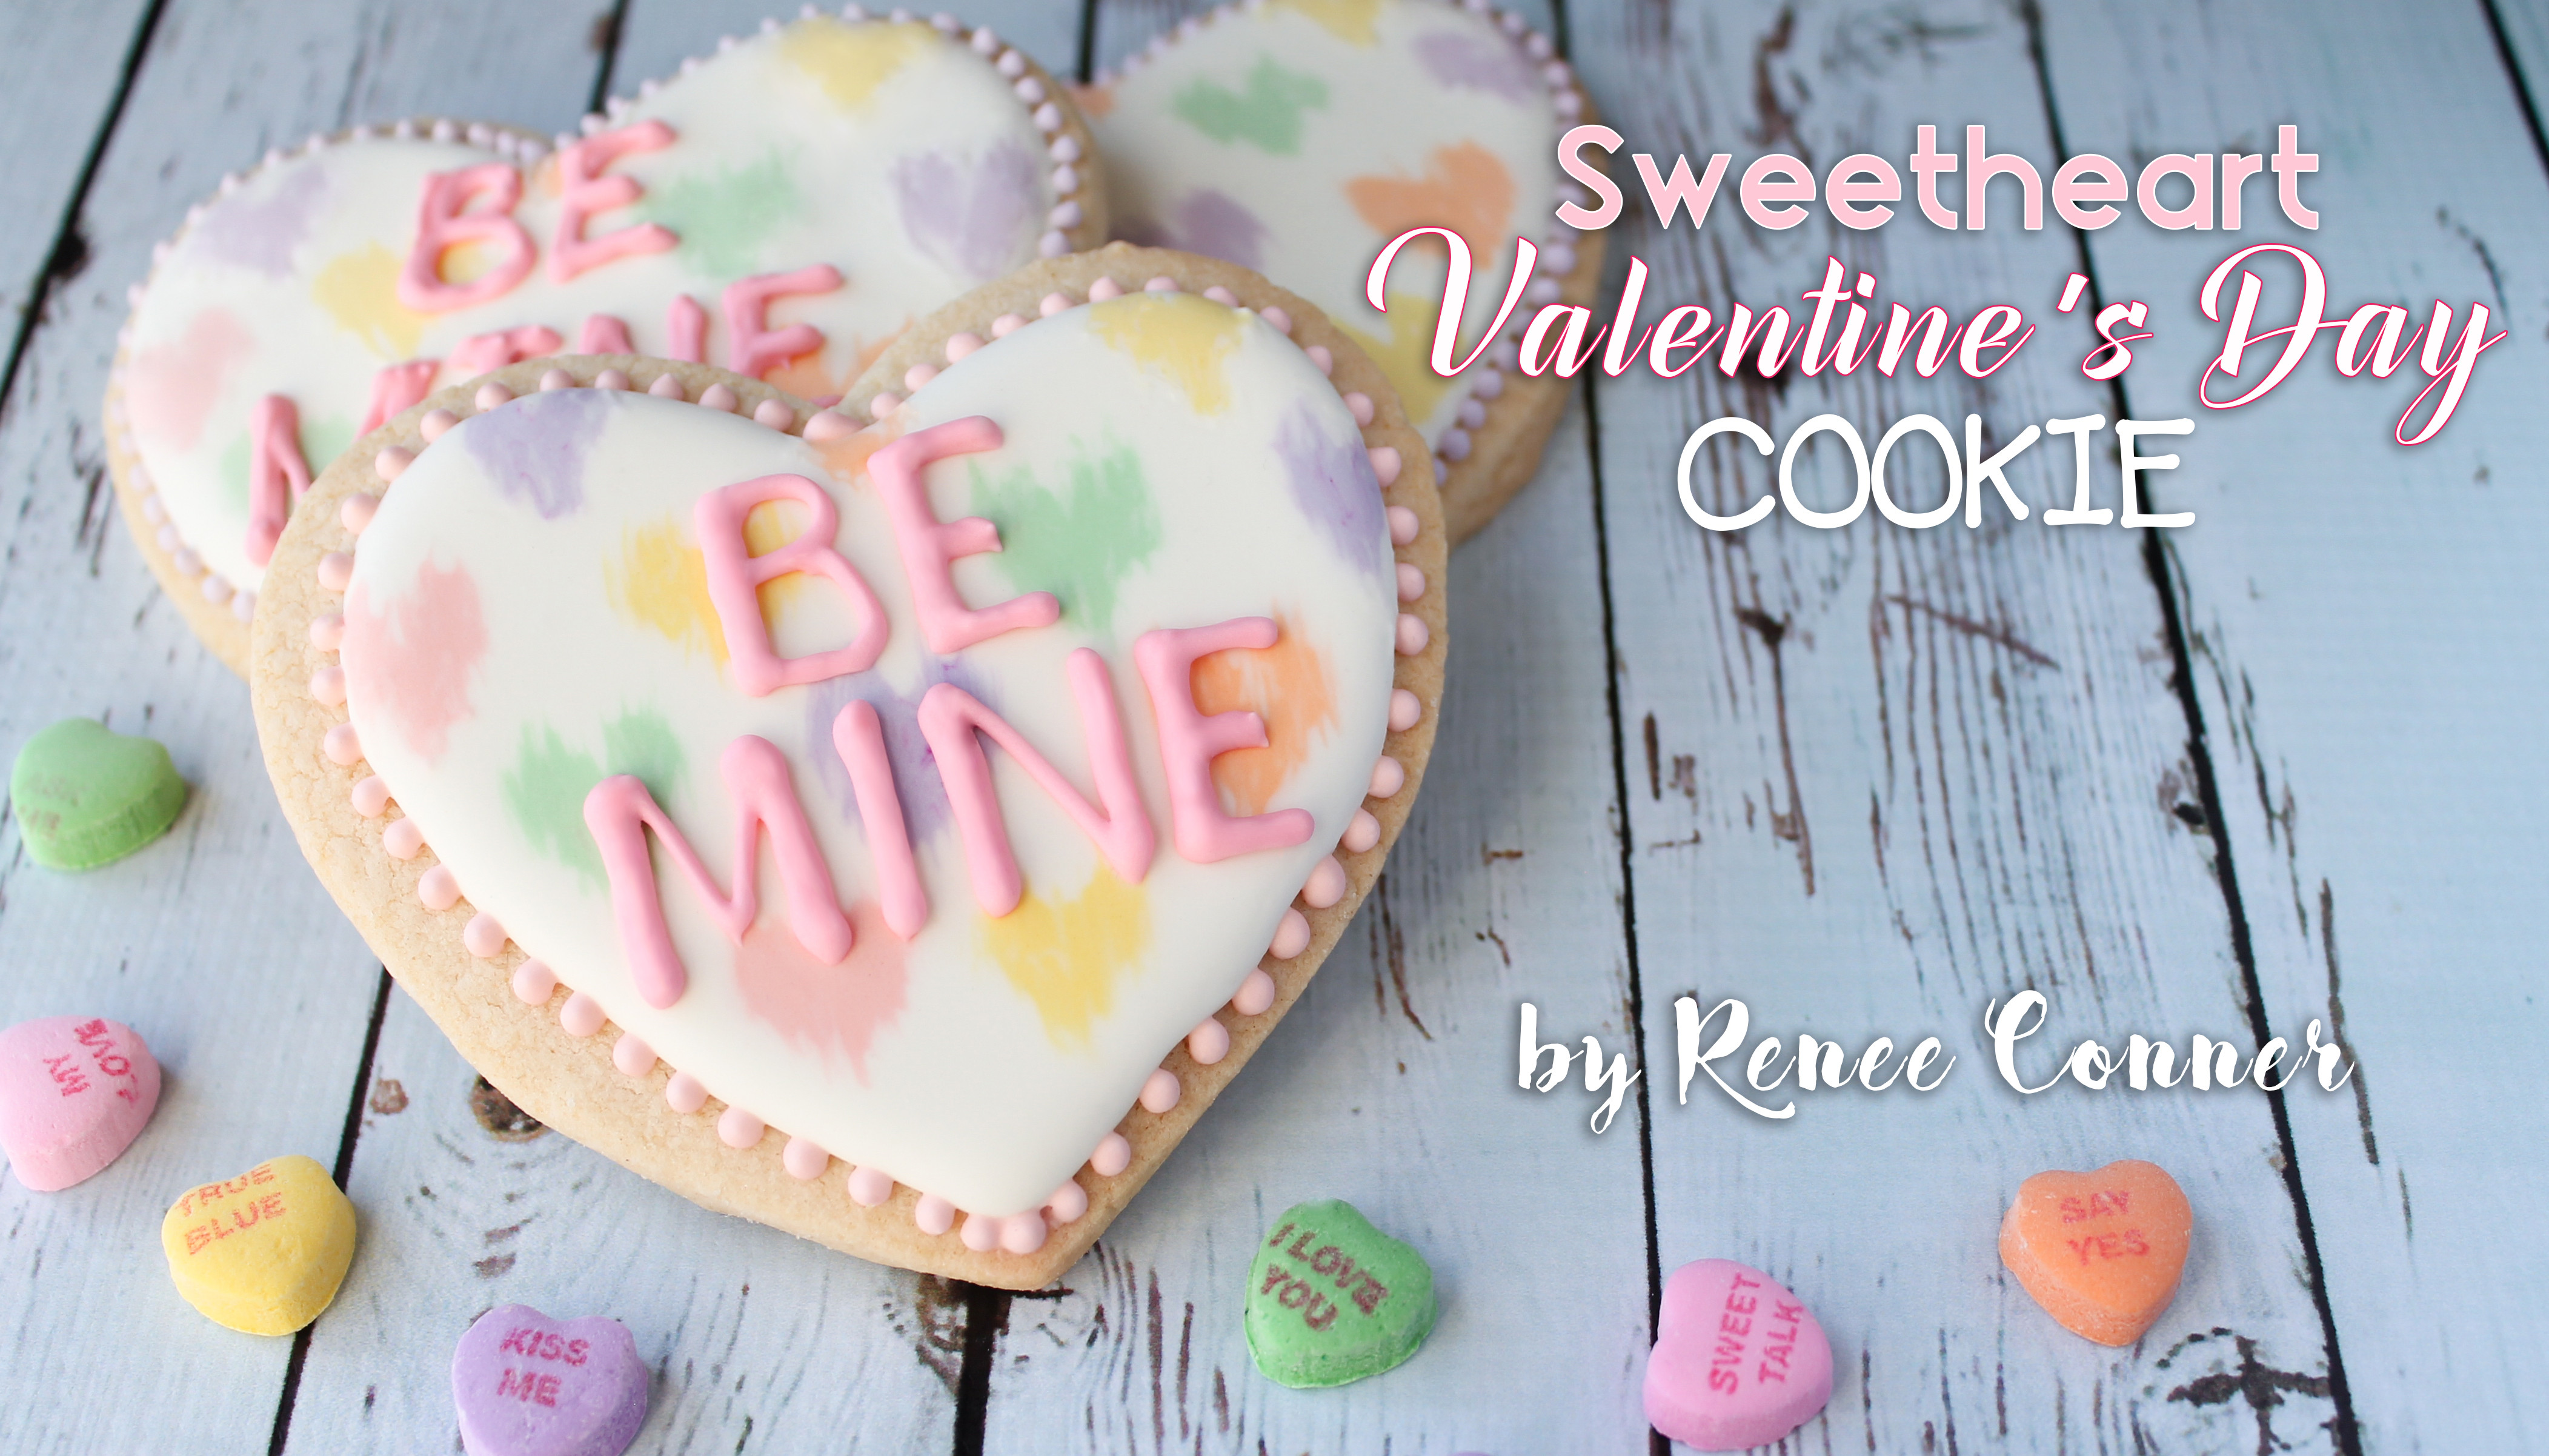 Sweetheart Valentine's Day Cookies